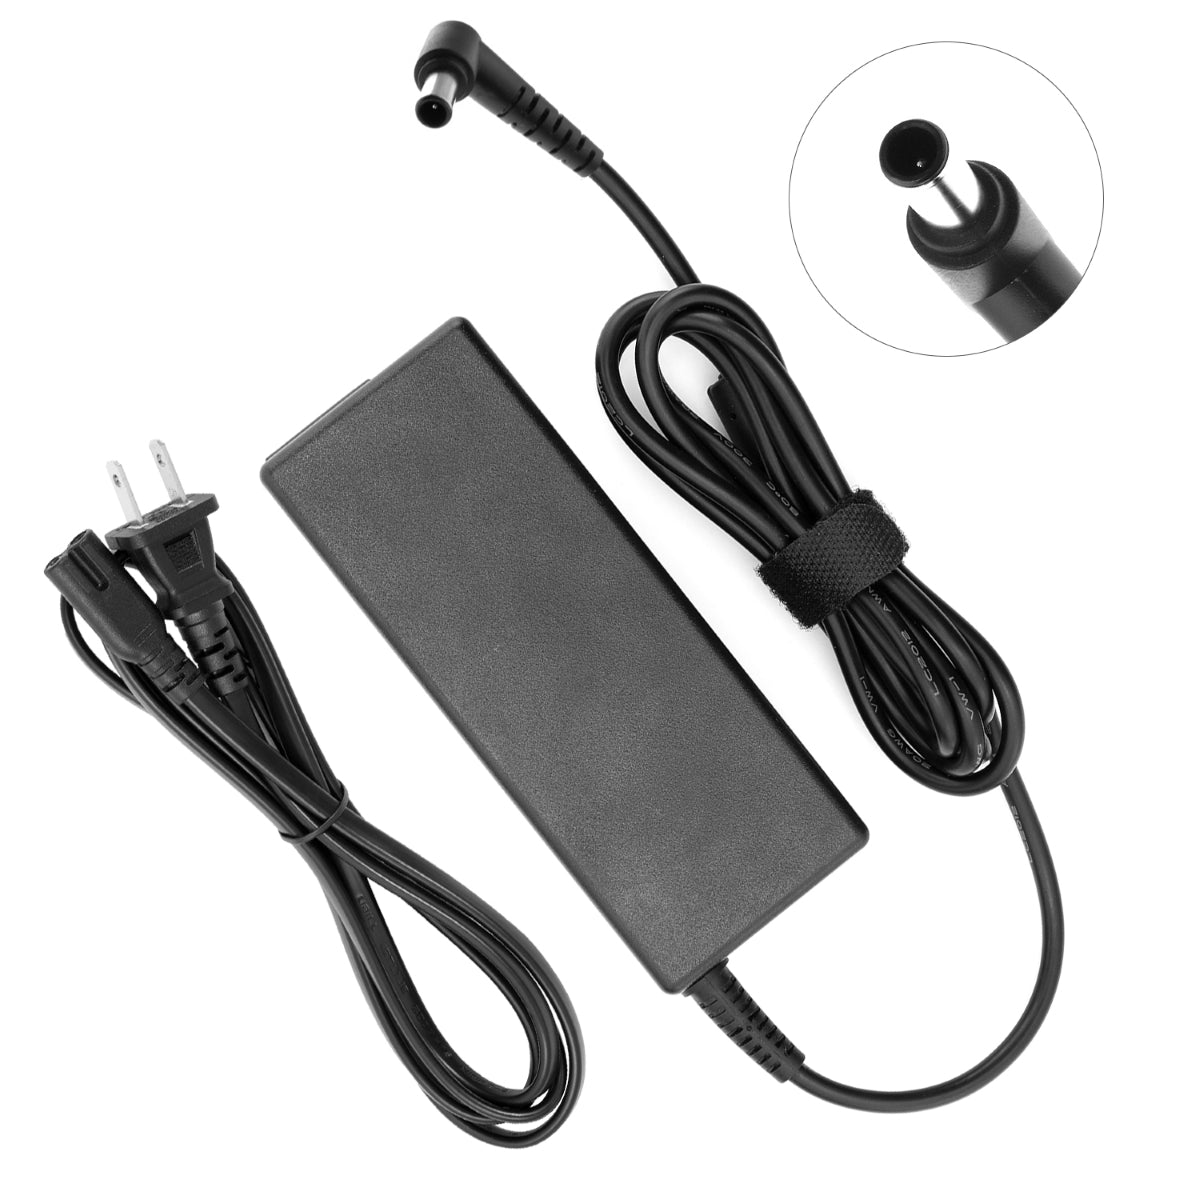 Power Adapter for LG 27MP60G-B Monitor TV